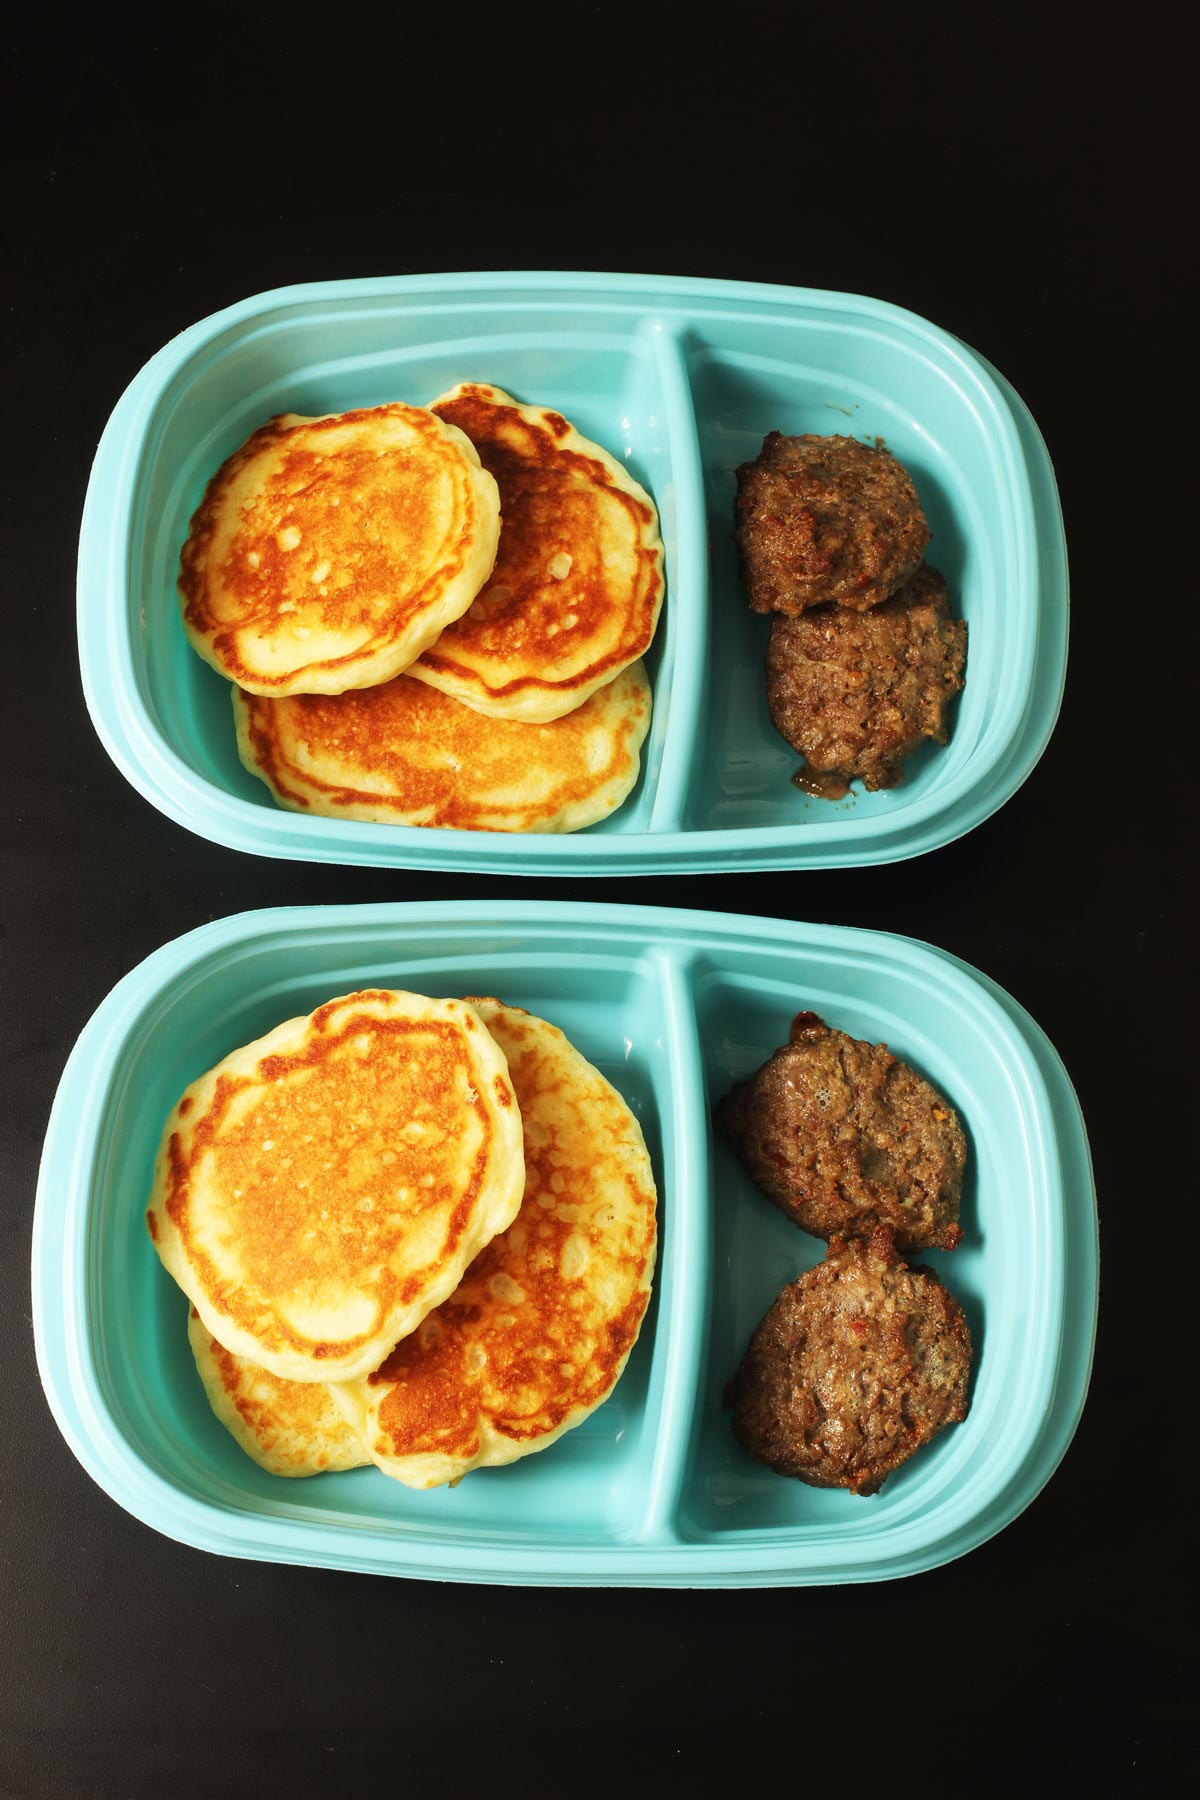 pancakes and sausages in meal prep boxes.